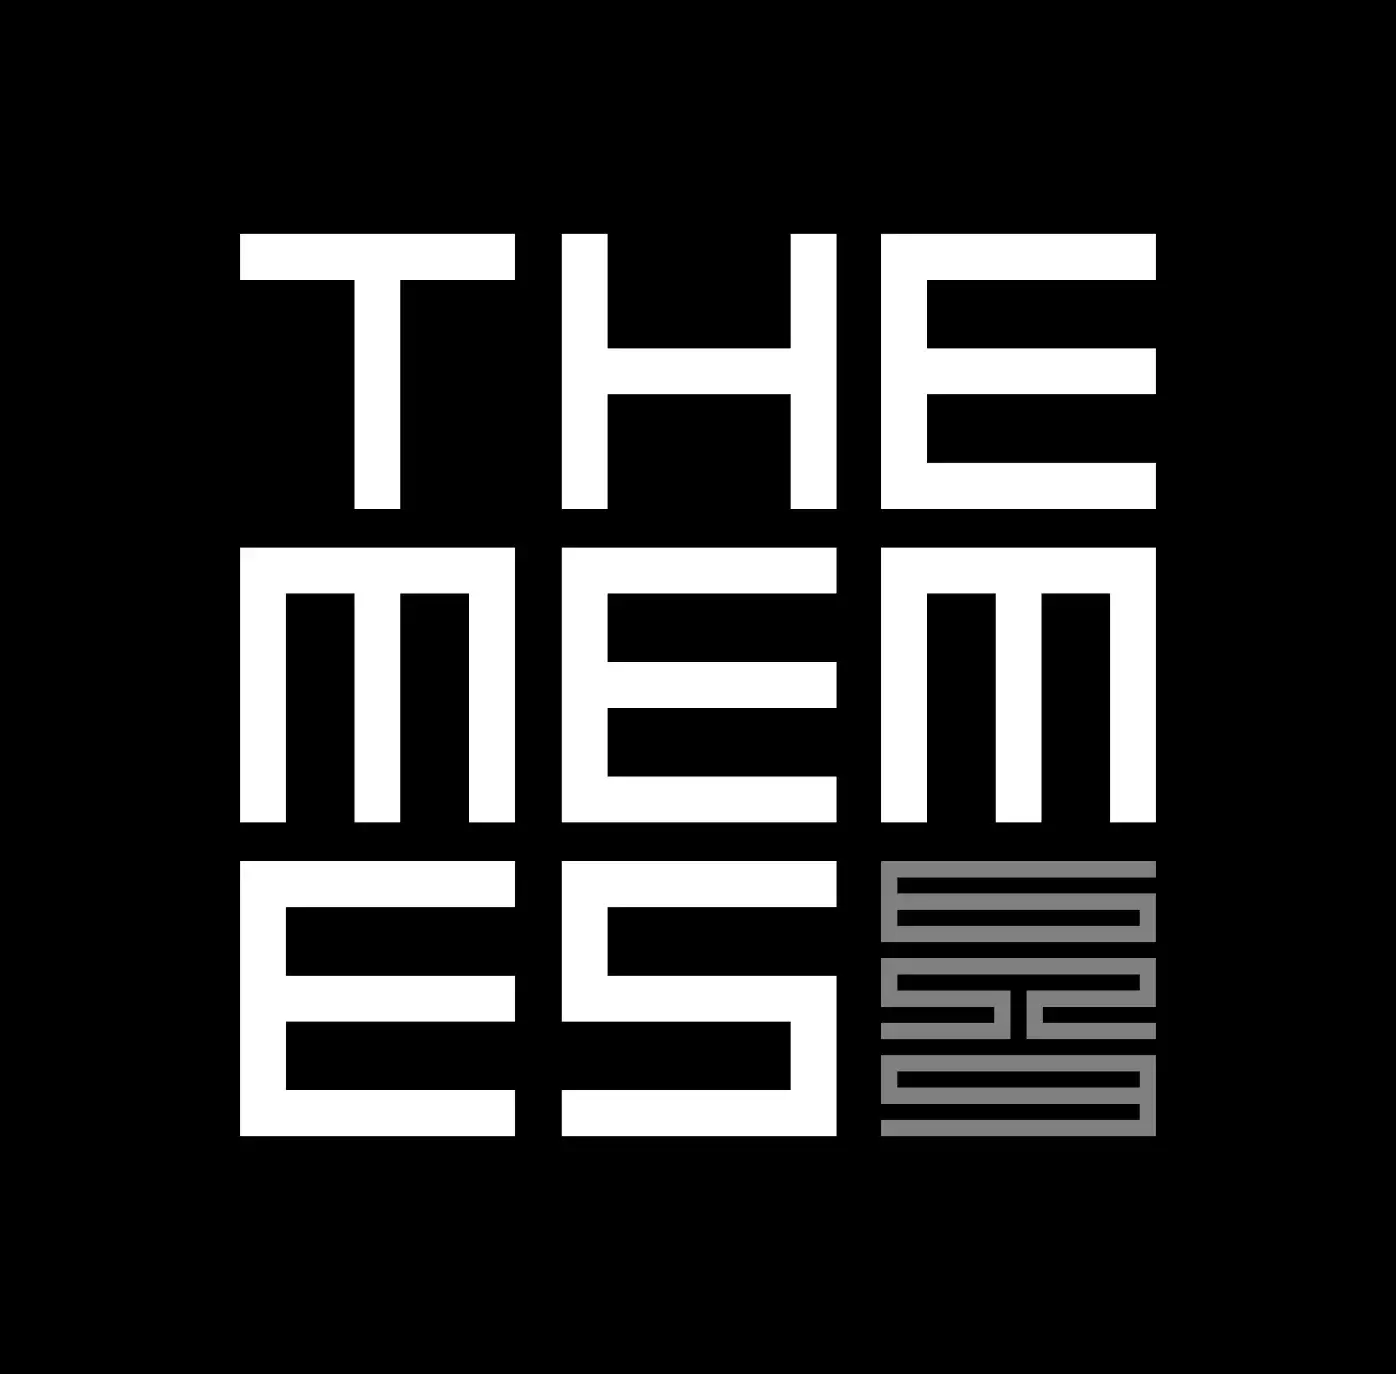 4. The Memes by 6529 